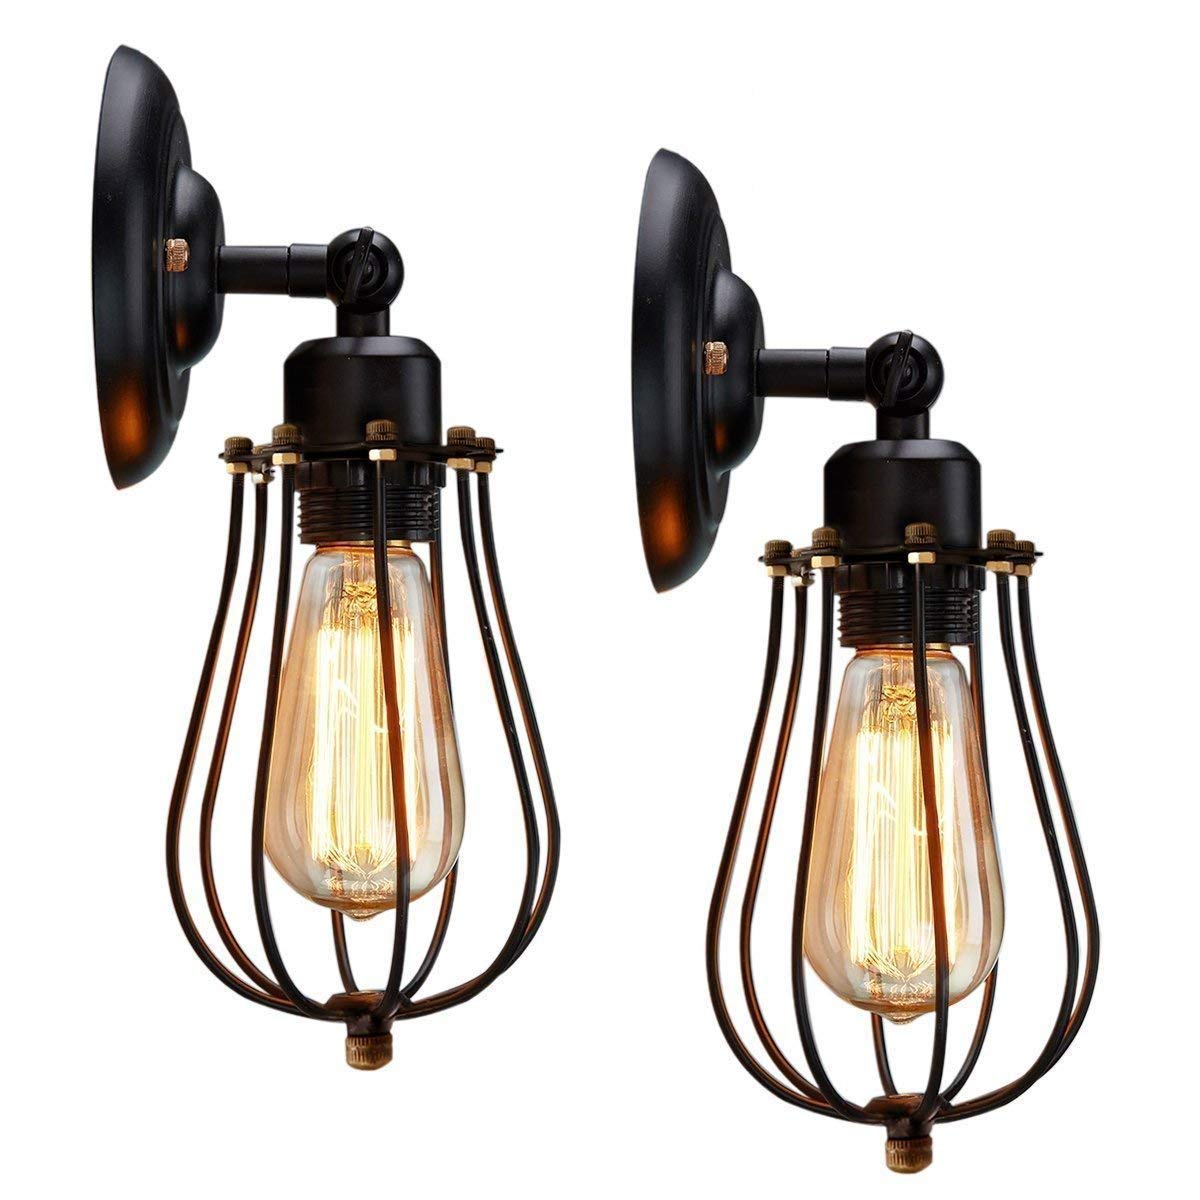 The Best Farmhouse Sconces under $50 on Amazon! Affordable #farmhouse style lighting you will love! #DIY #Fixerupper